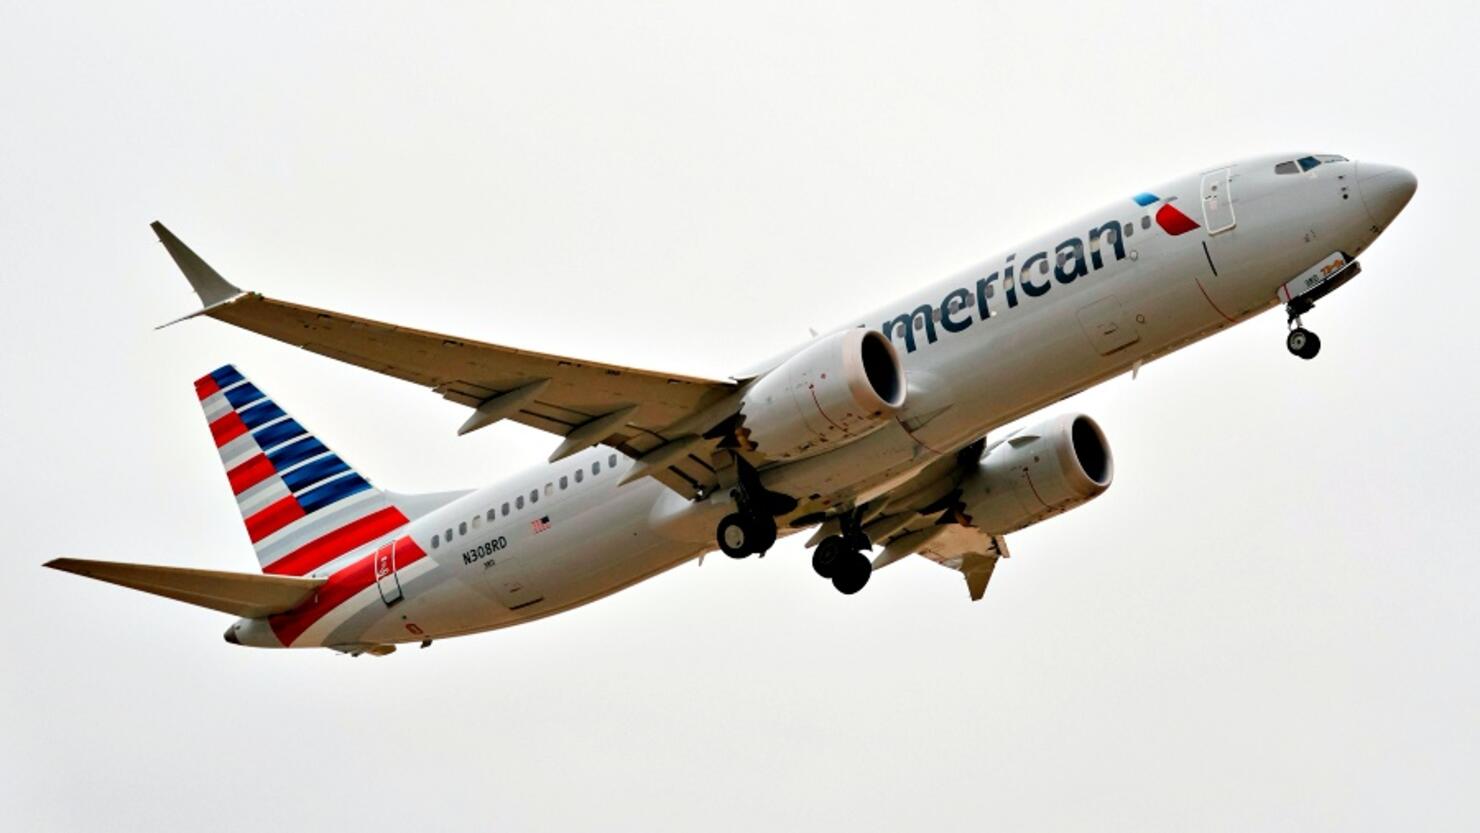 US-AVIATION-ACCIDENT-BOEING-AMERICANAIRLINES